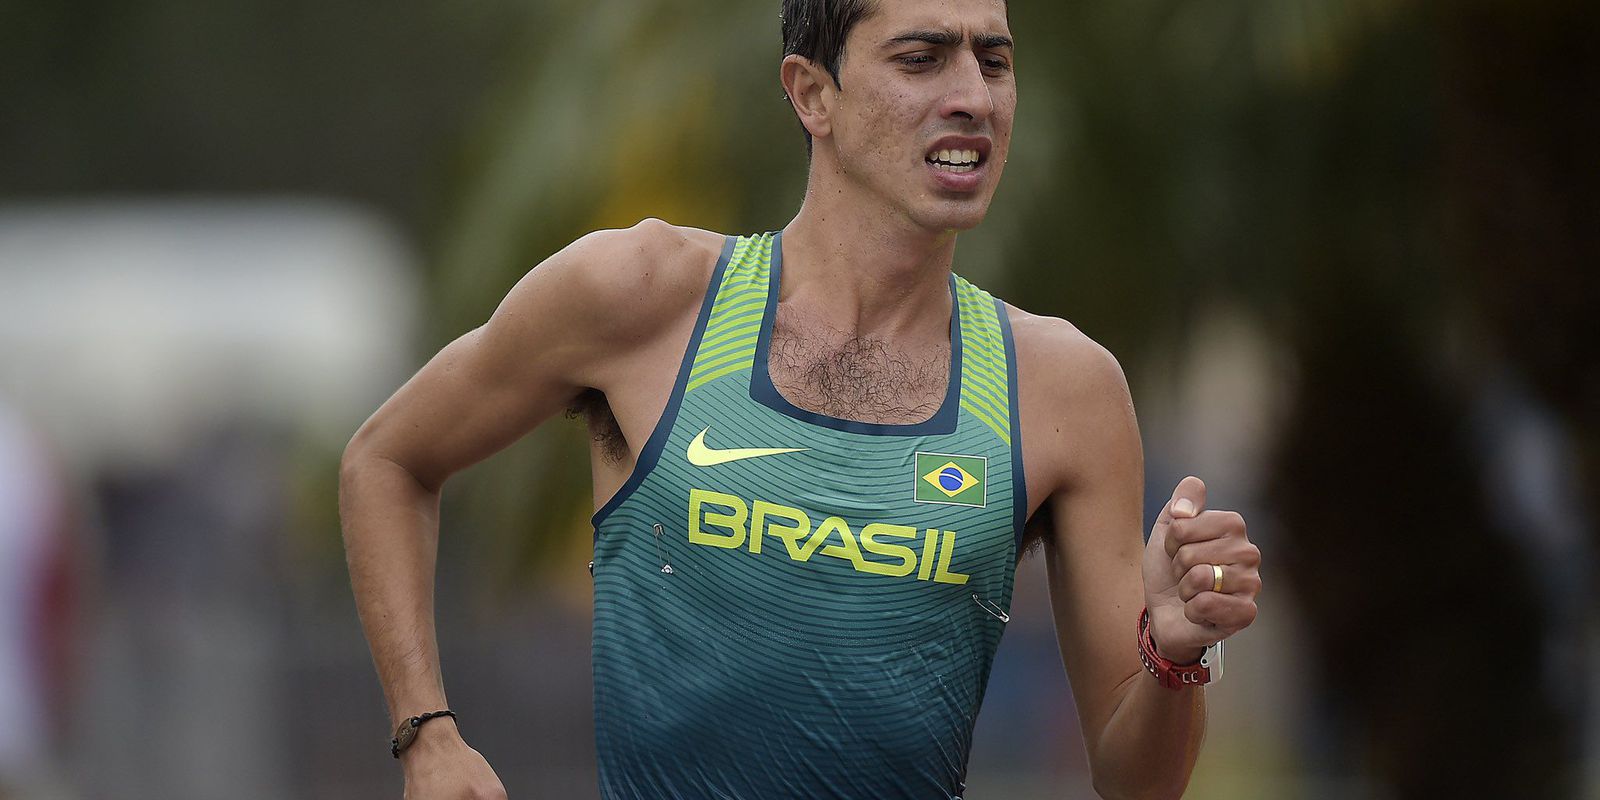 Racewalk: Caio Bonfim wins gold in the world circuit stage